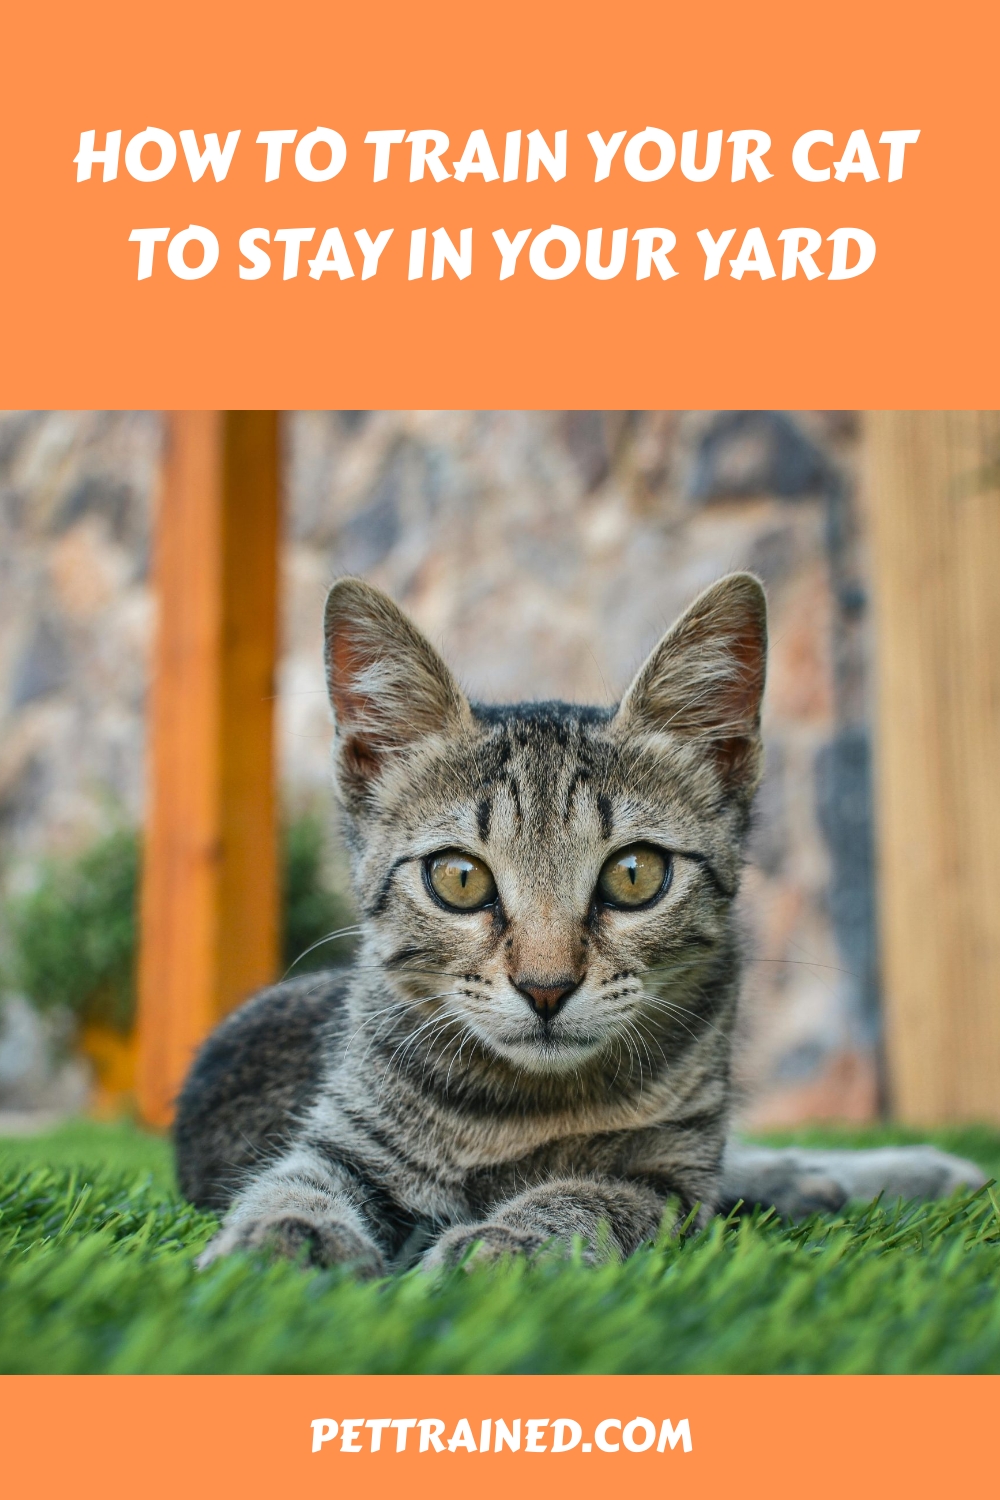 How to Train Your Cat to Stay in Your Yard